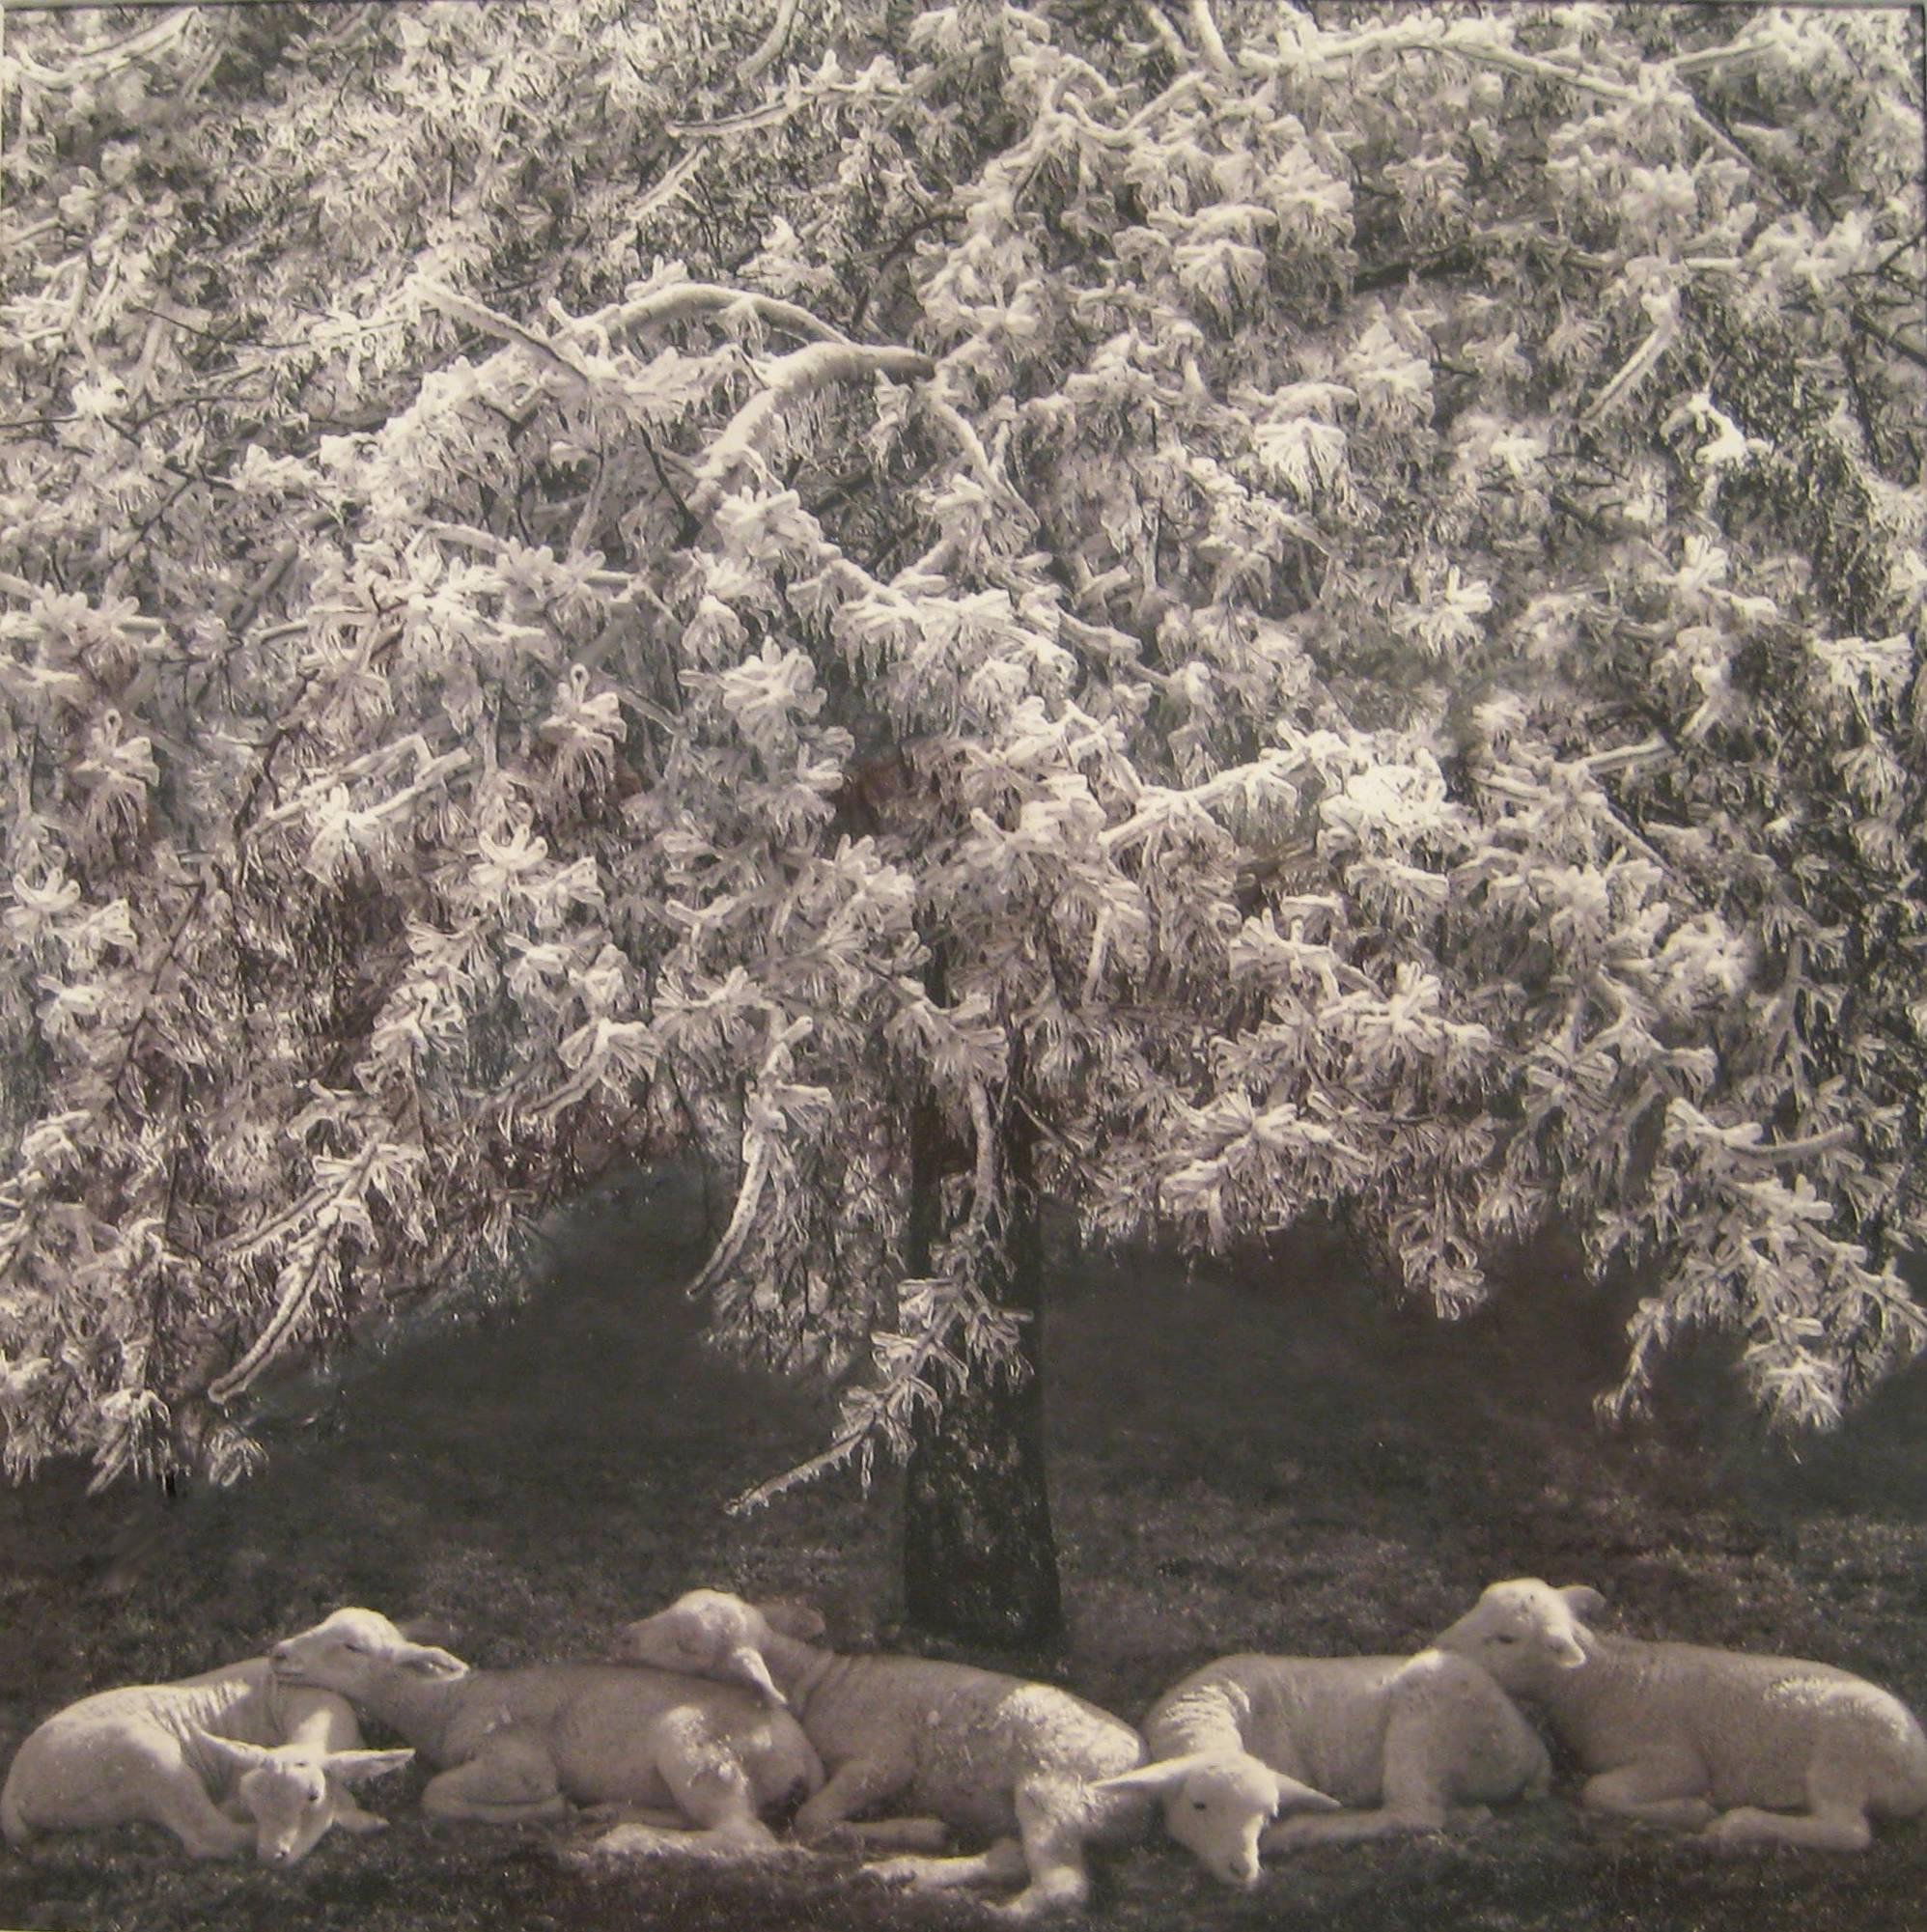 Jerry Freedner Still-Life Photograph - Winter Lambs (Black and White Photograph of White Lambs in a Landscape)